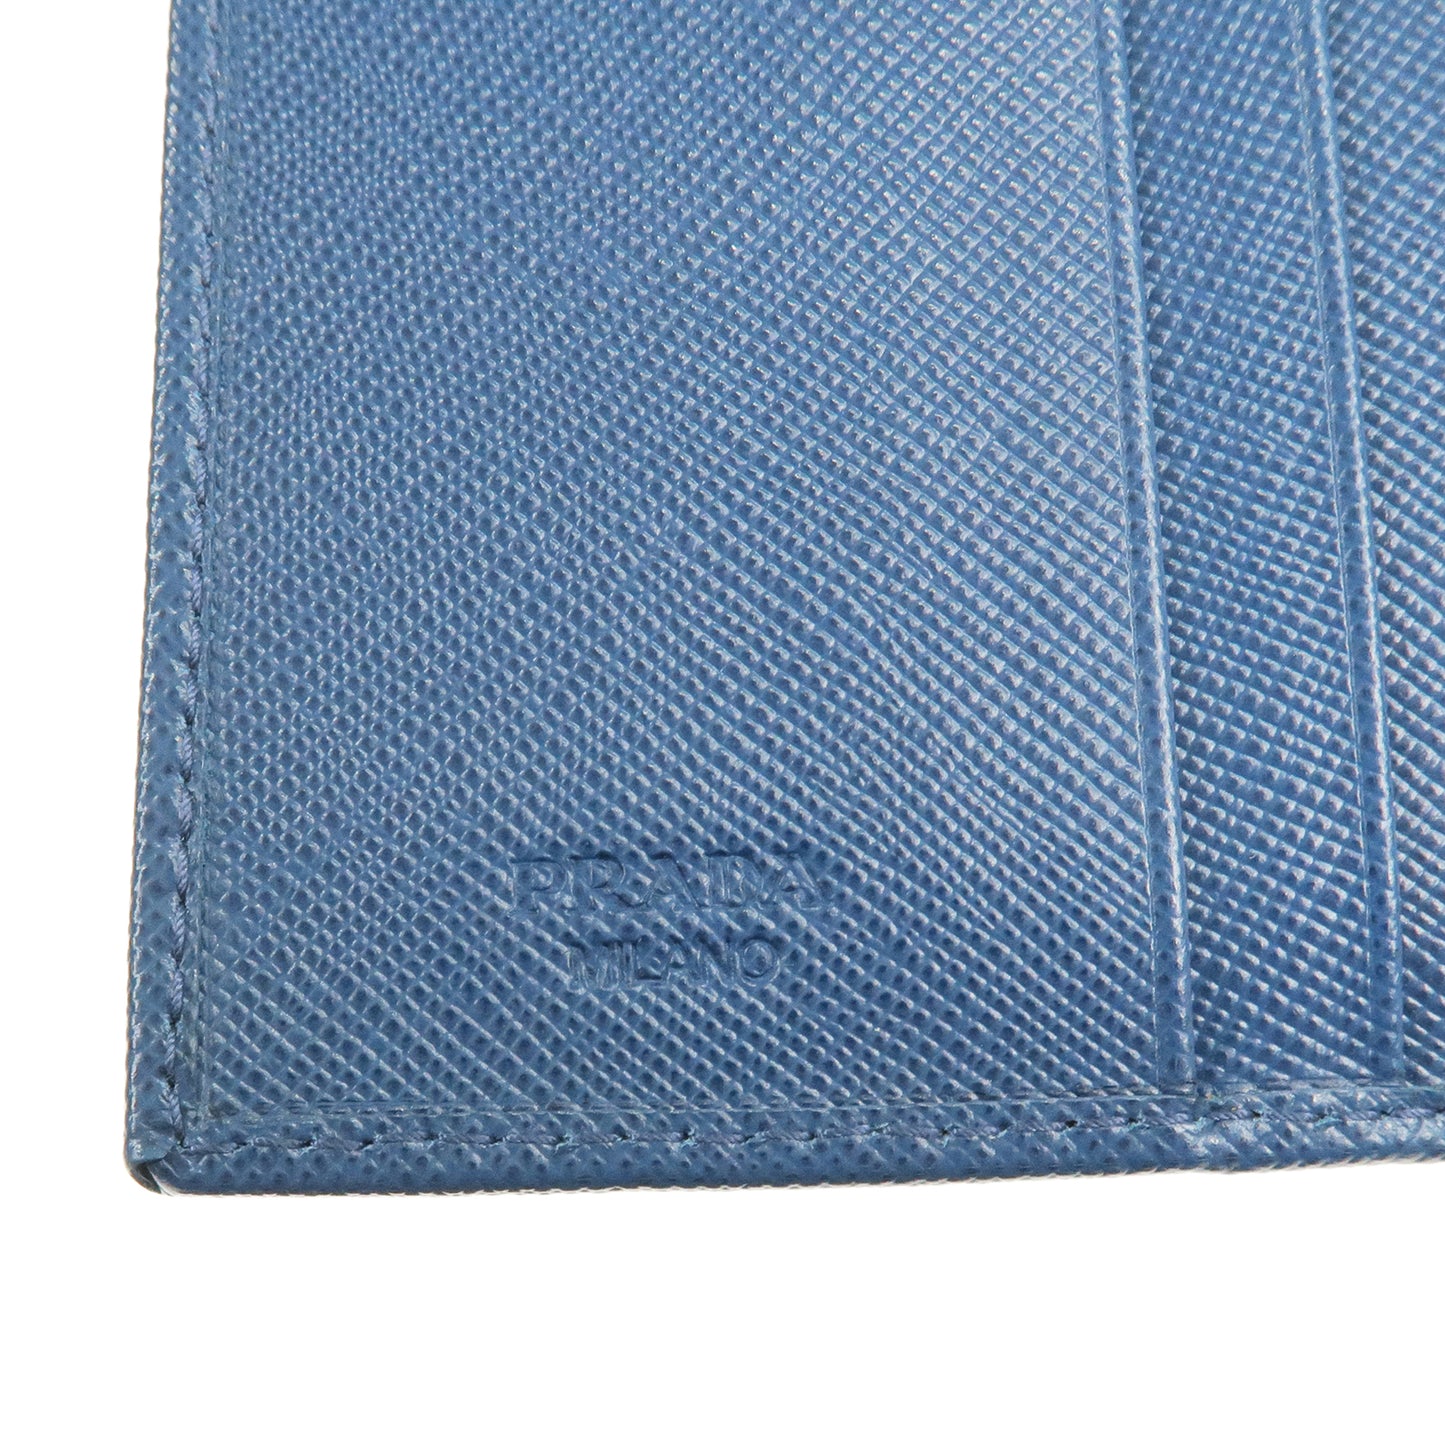 PRADA Leather Trifold Wallet Coin Case BLUETTE Navy 1M1392